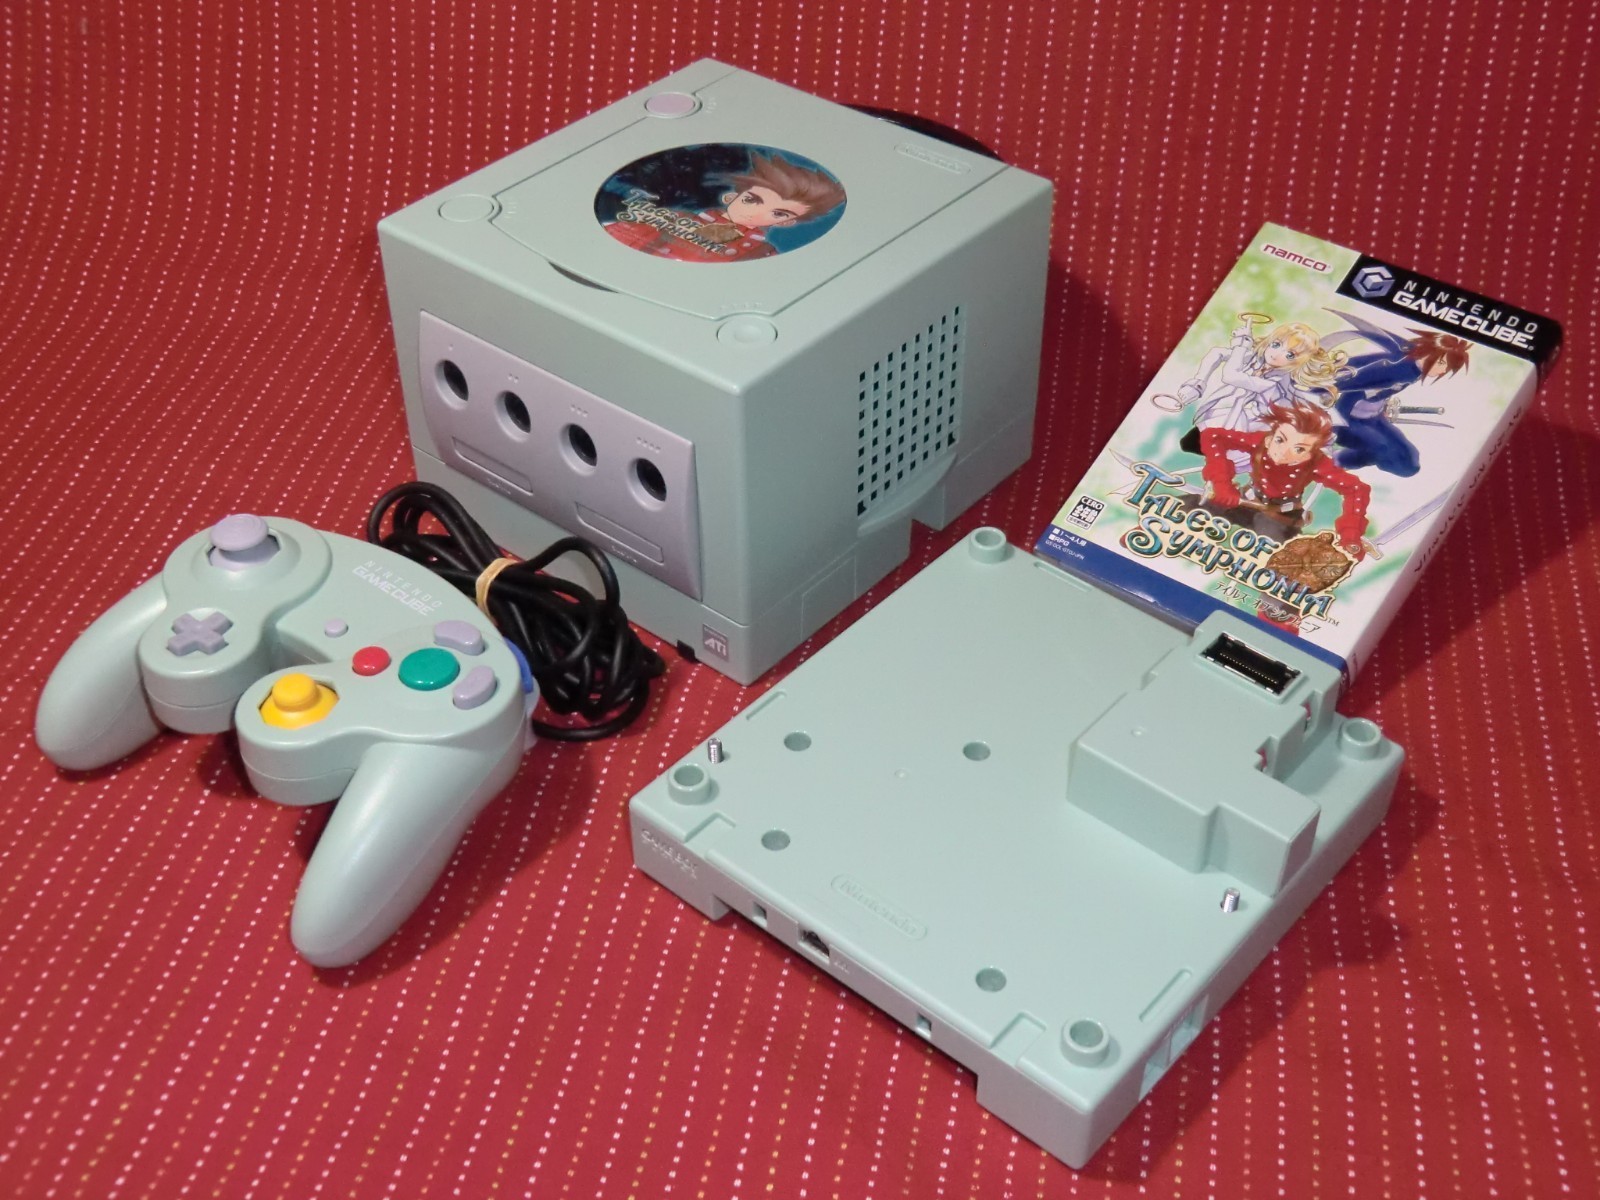 Nintendo-GAMECUBE-console-“Tales-of-Symphonia”-Limited-color-version-3-Games.jpg